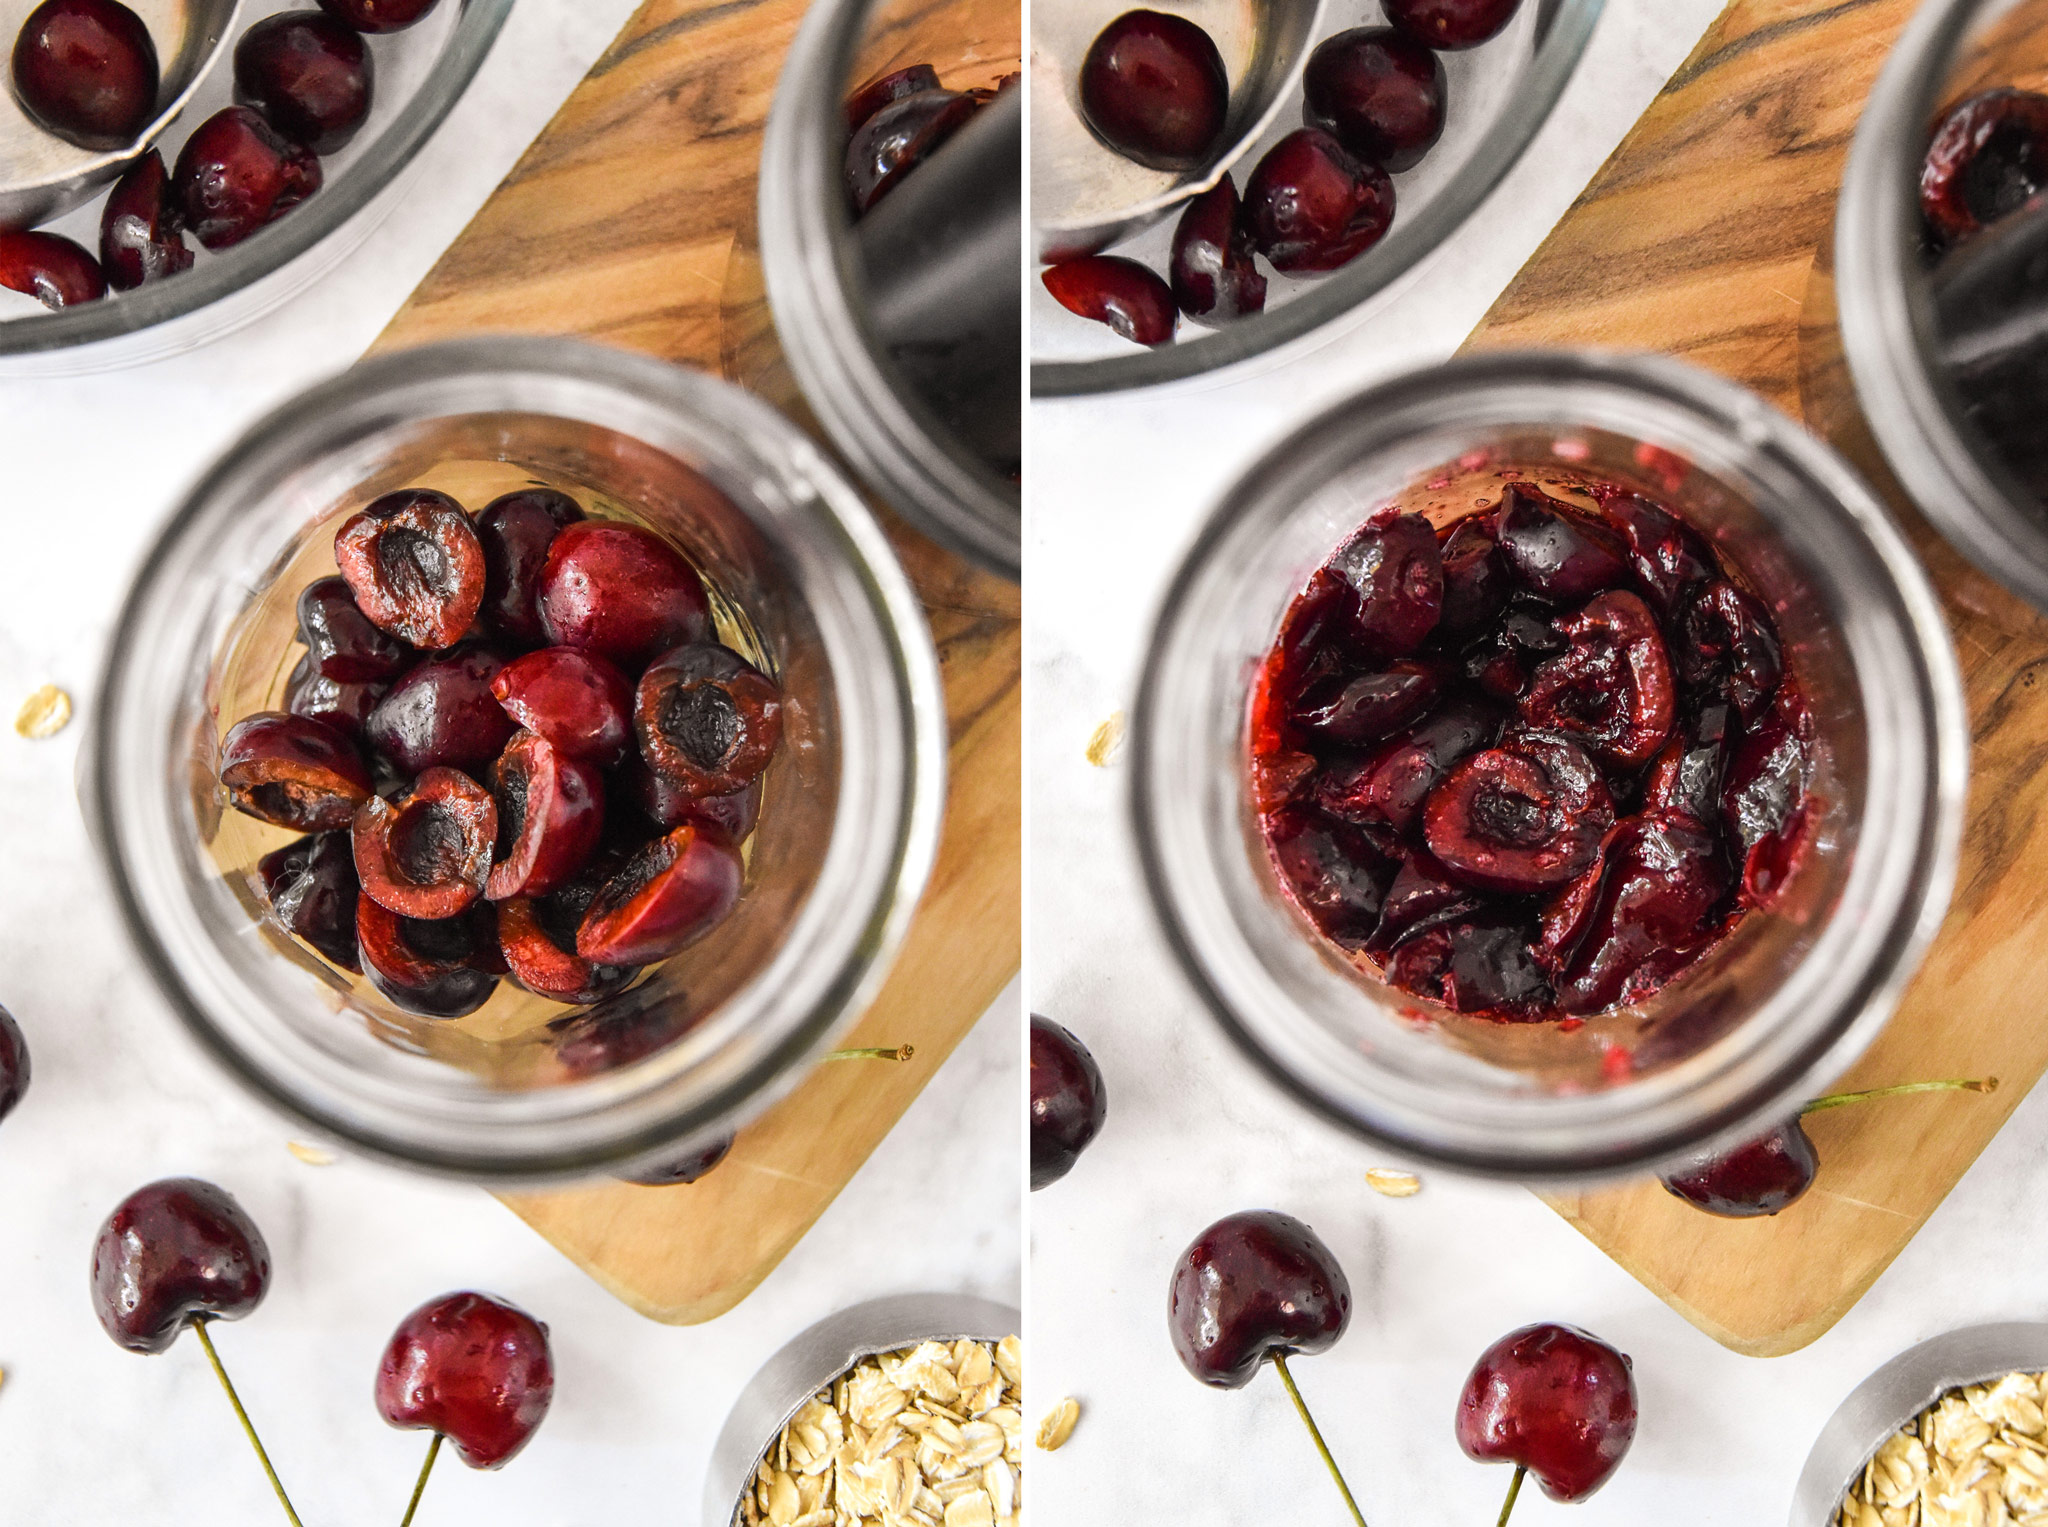 before and after muddling the cherries for the overnight oats.